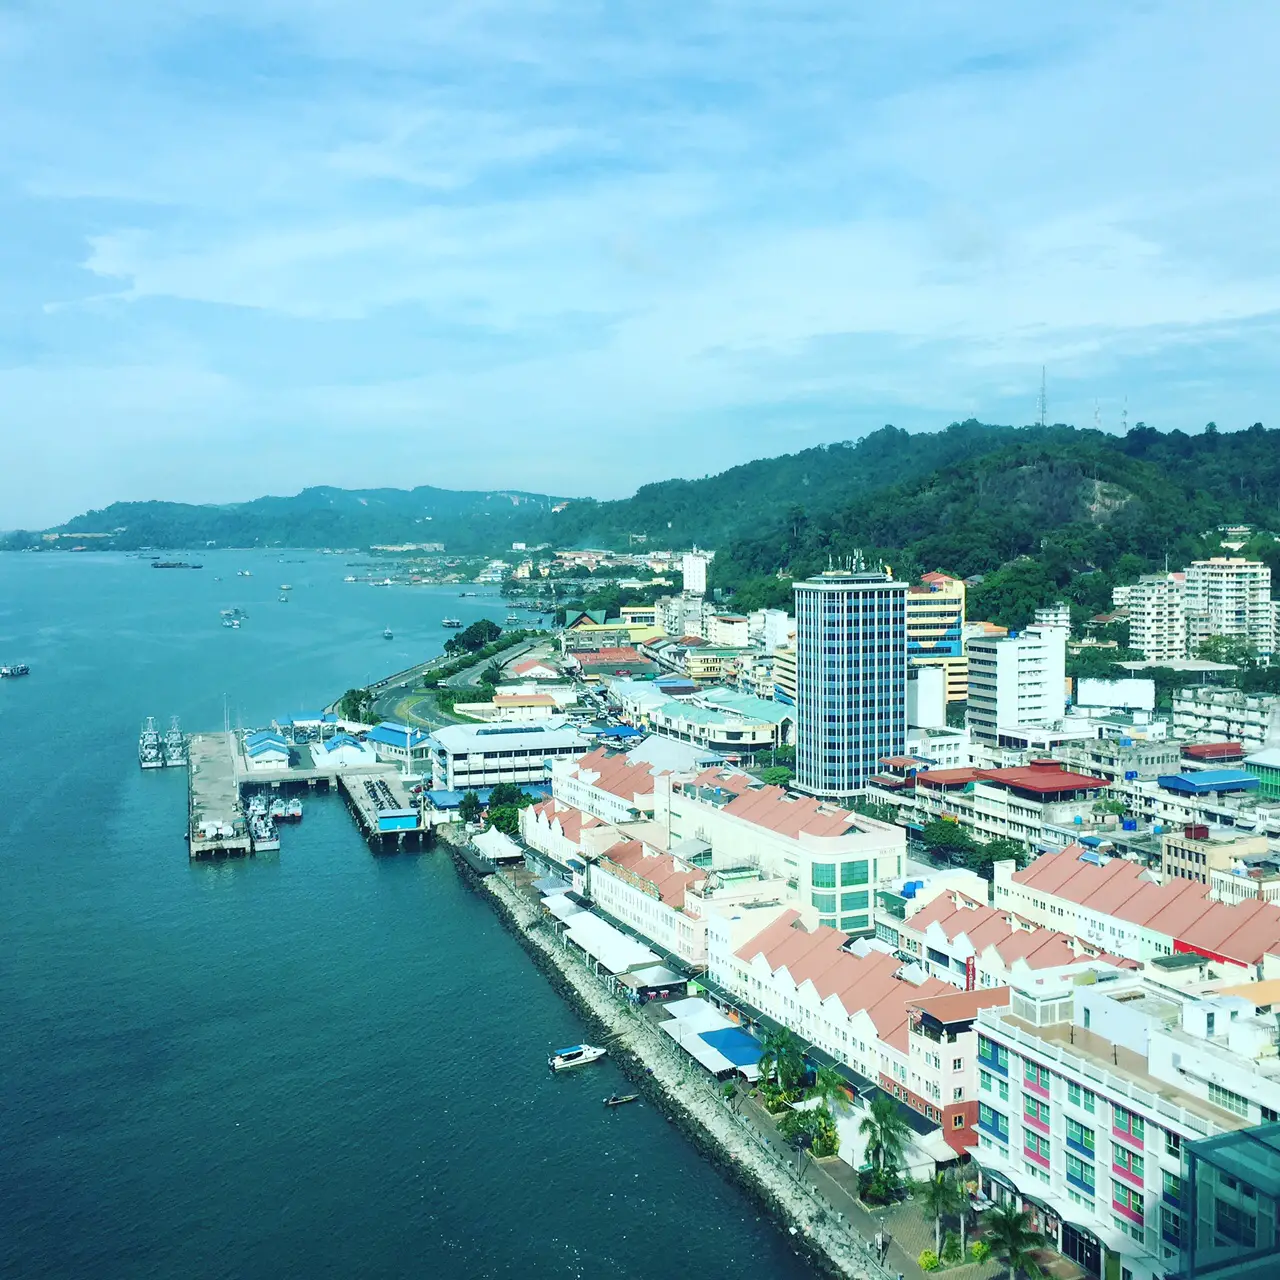 View from the Four Points Hotel in Sandakan